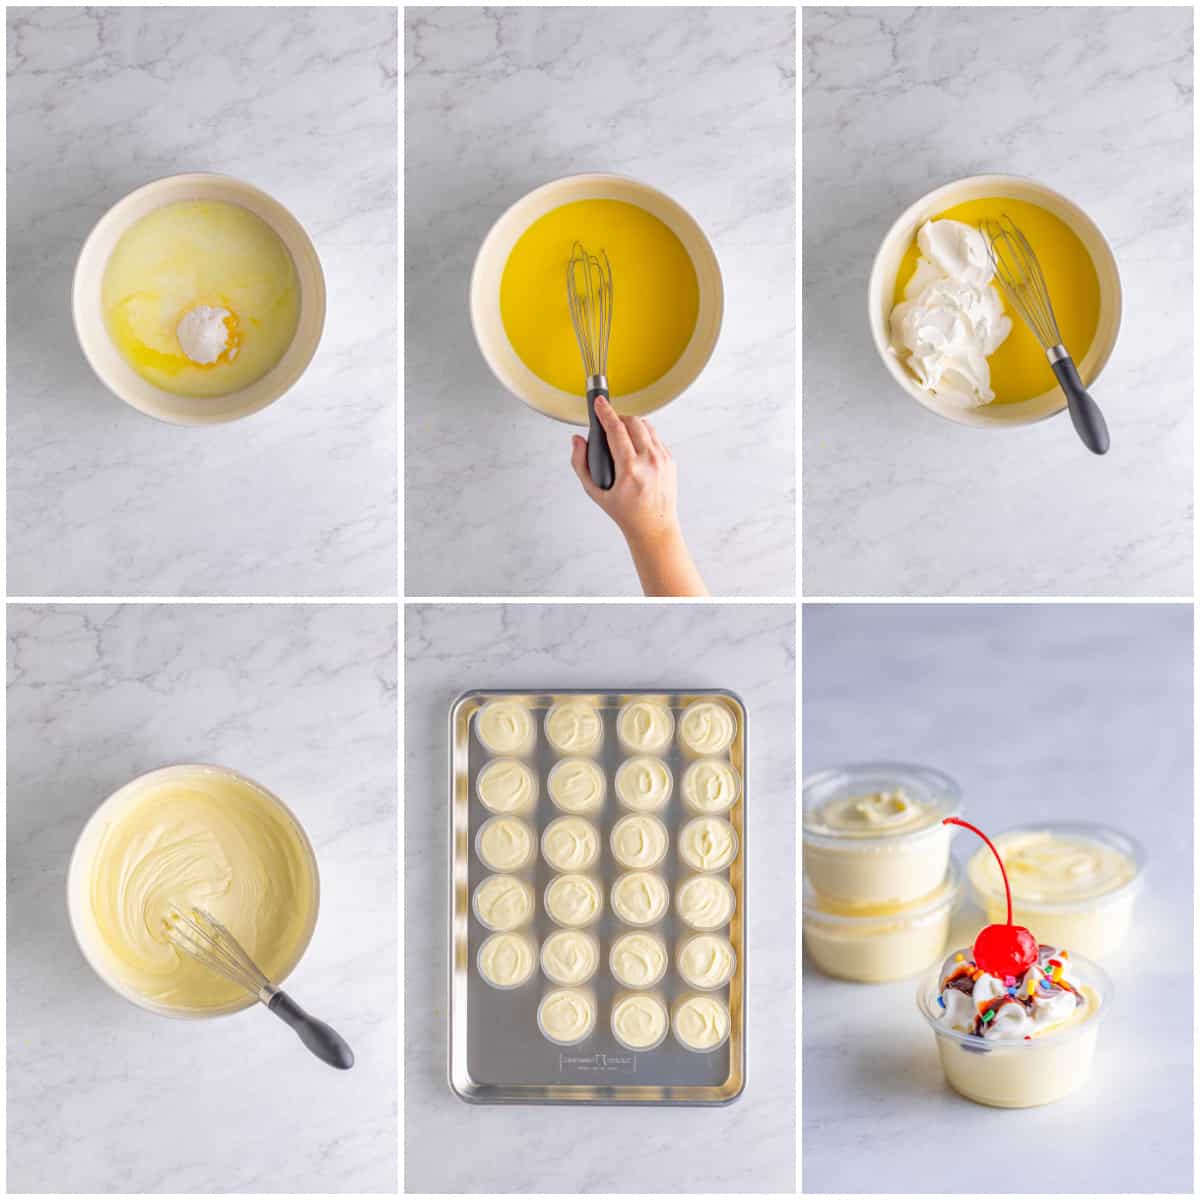 Step by step photos on how to make Banana Split Pudding Shots.